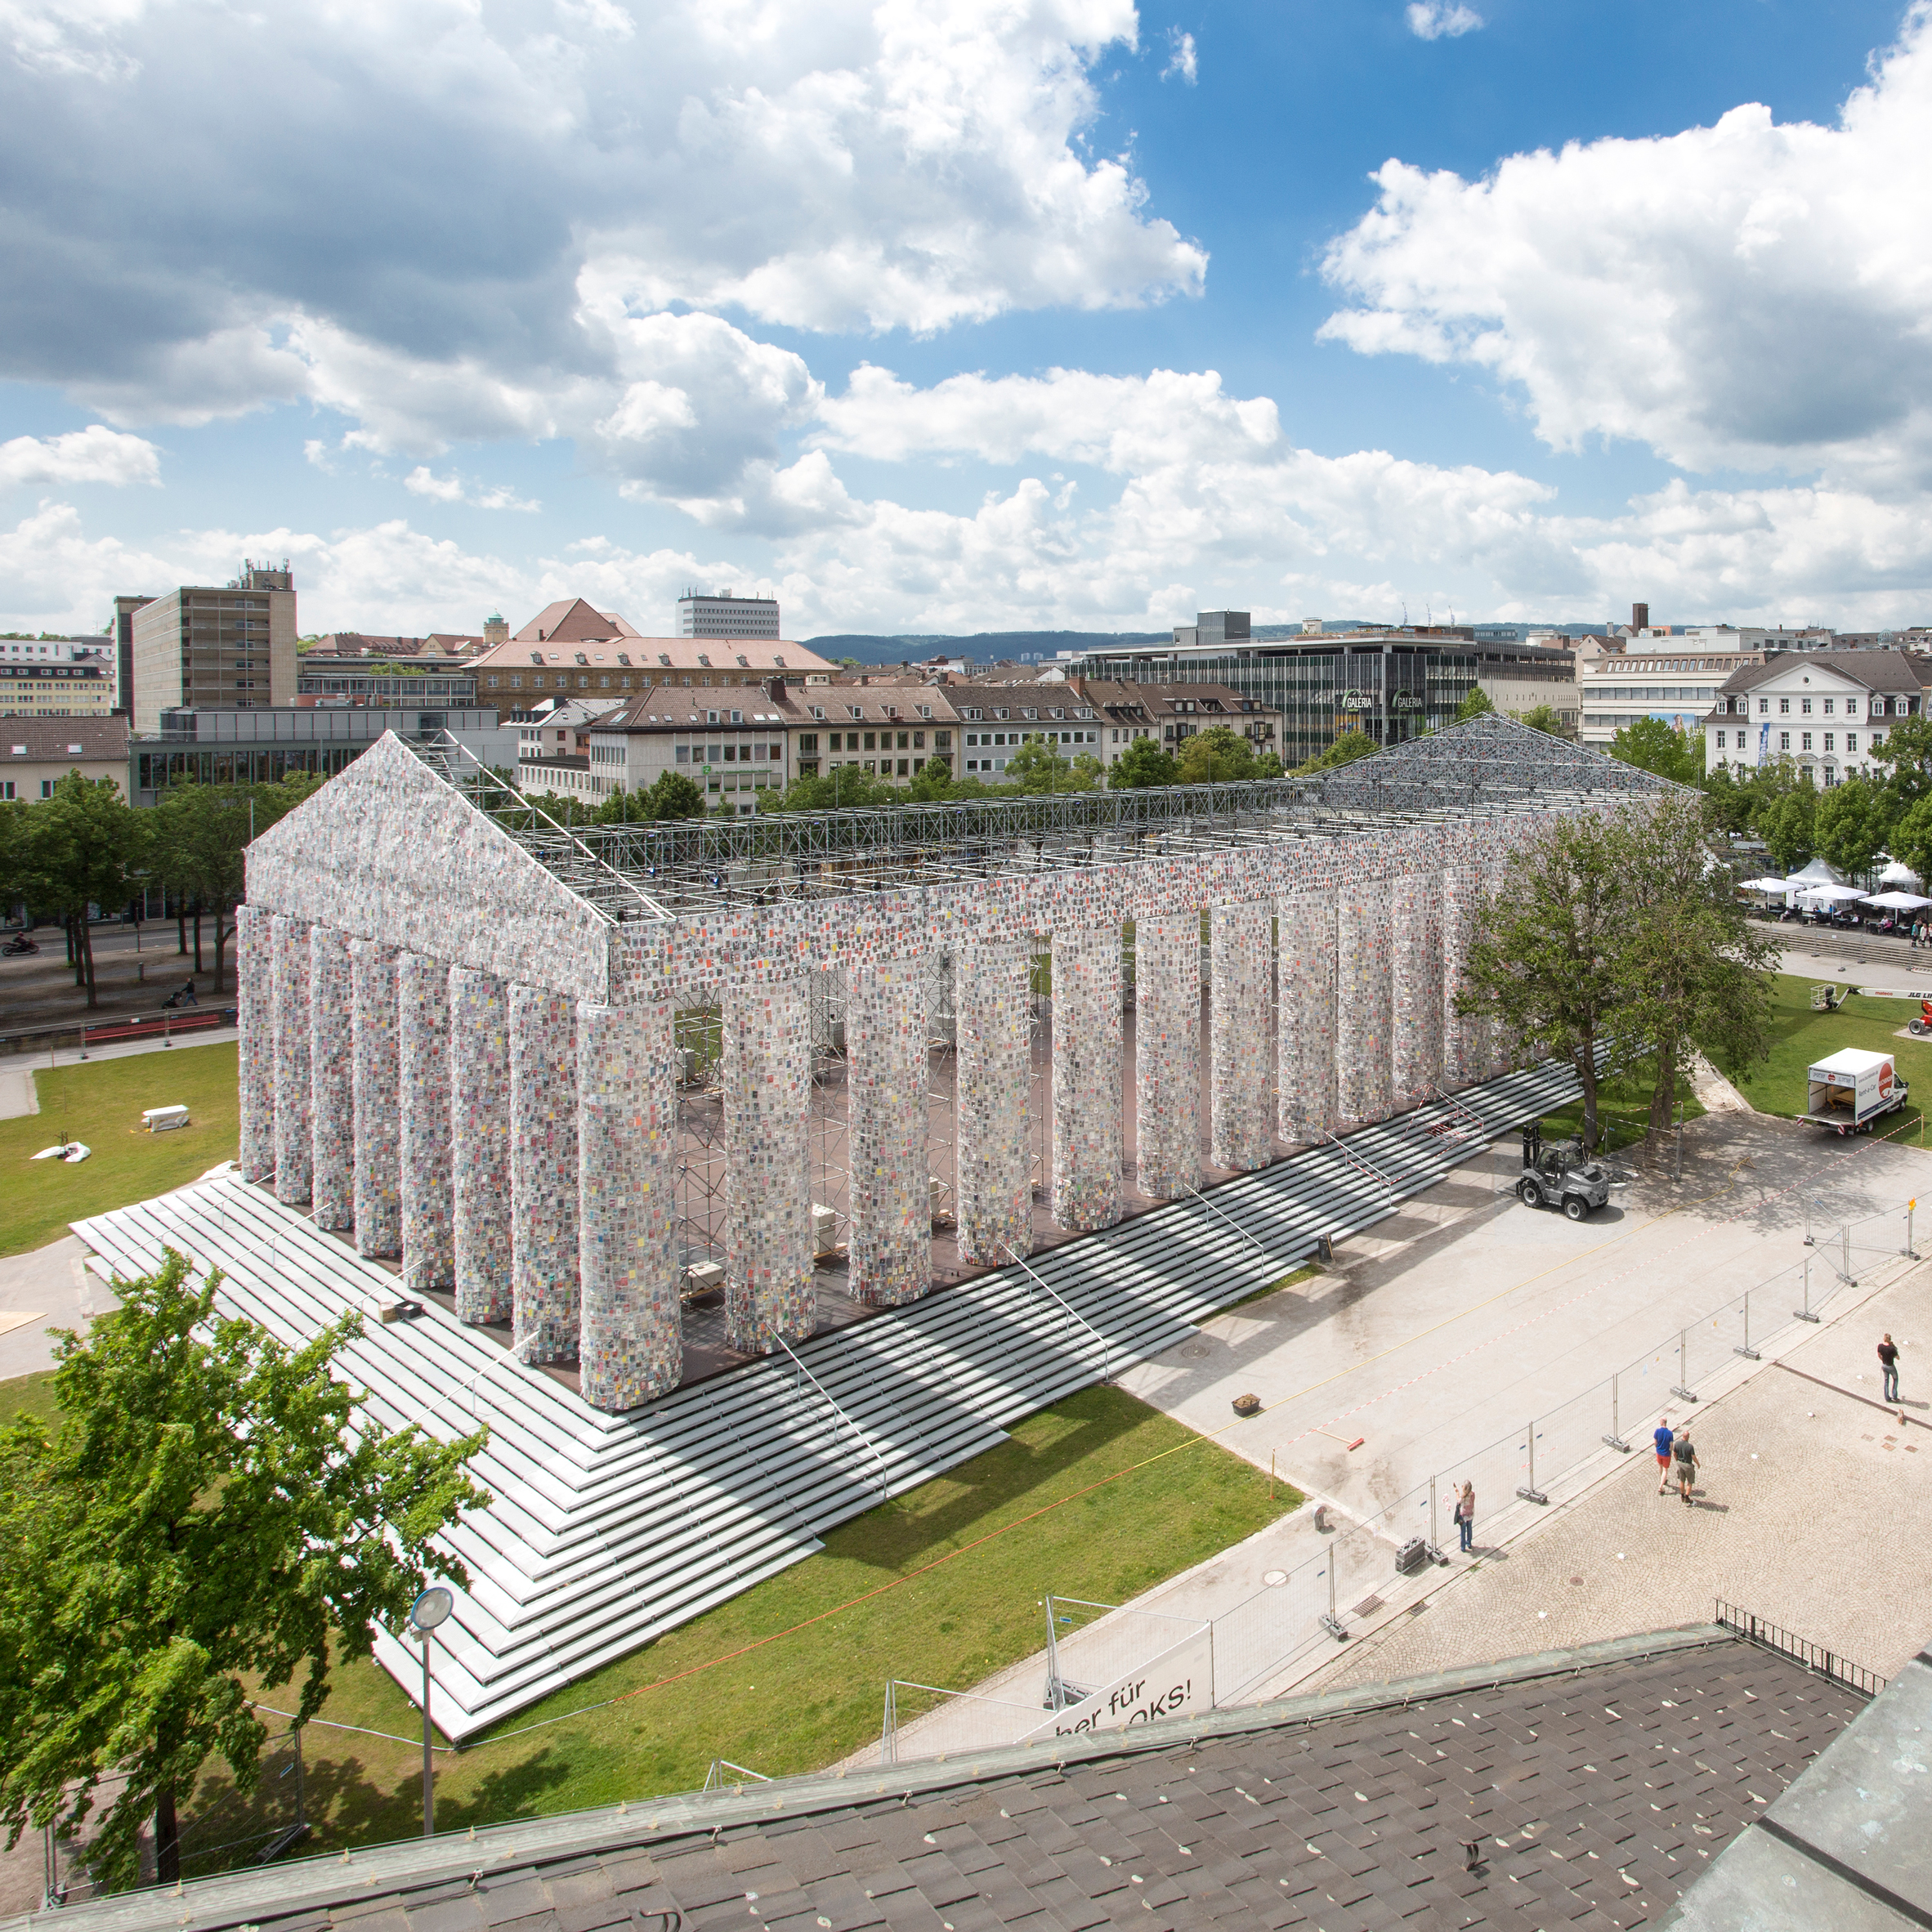 This week, BIG completed a war museum beside a Nazi bunker